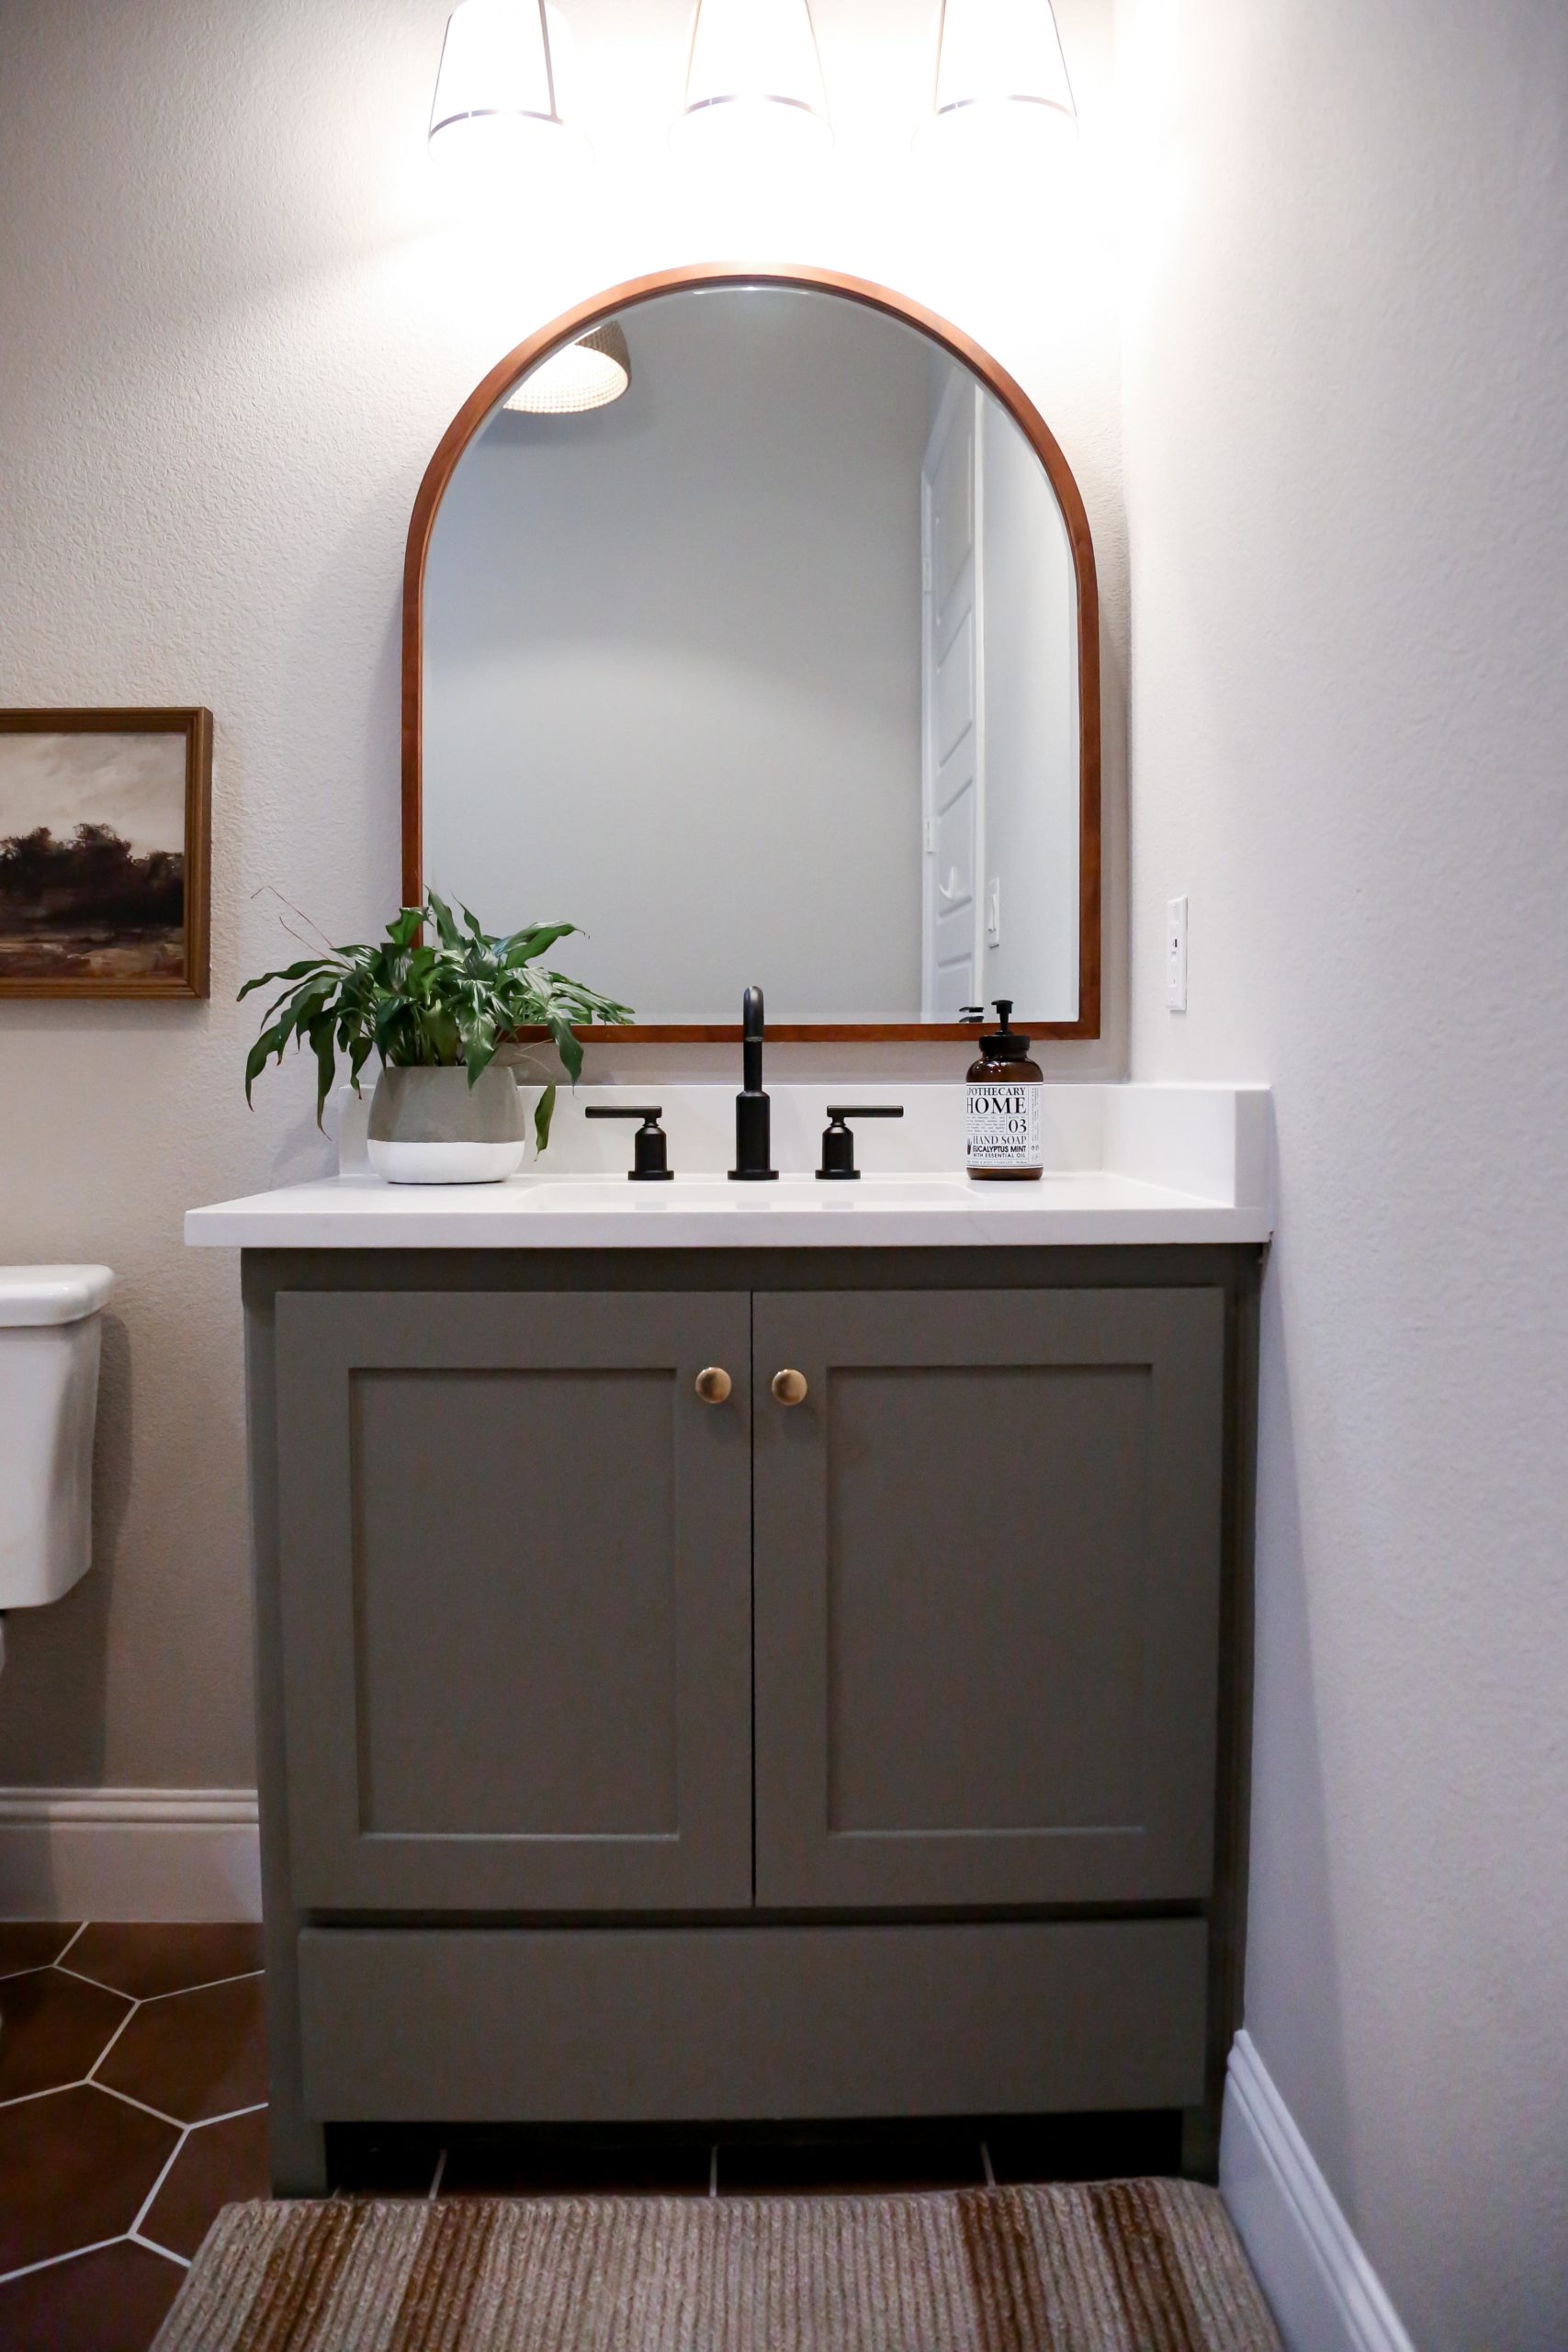 The Teasley Projects Guest Bathrooms: Shop the Look
Bathroom vanity
bathroom decor and accessories